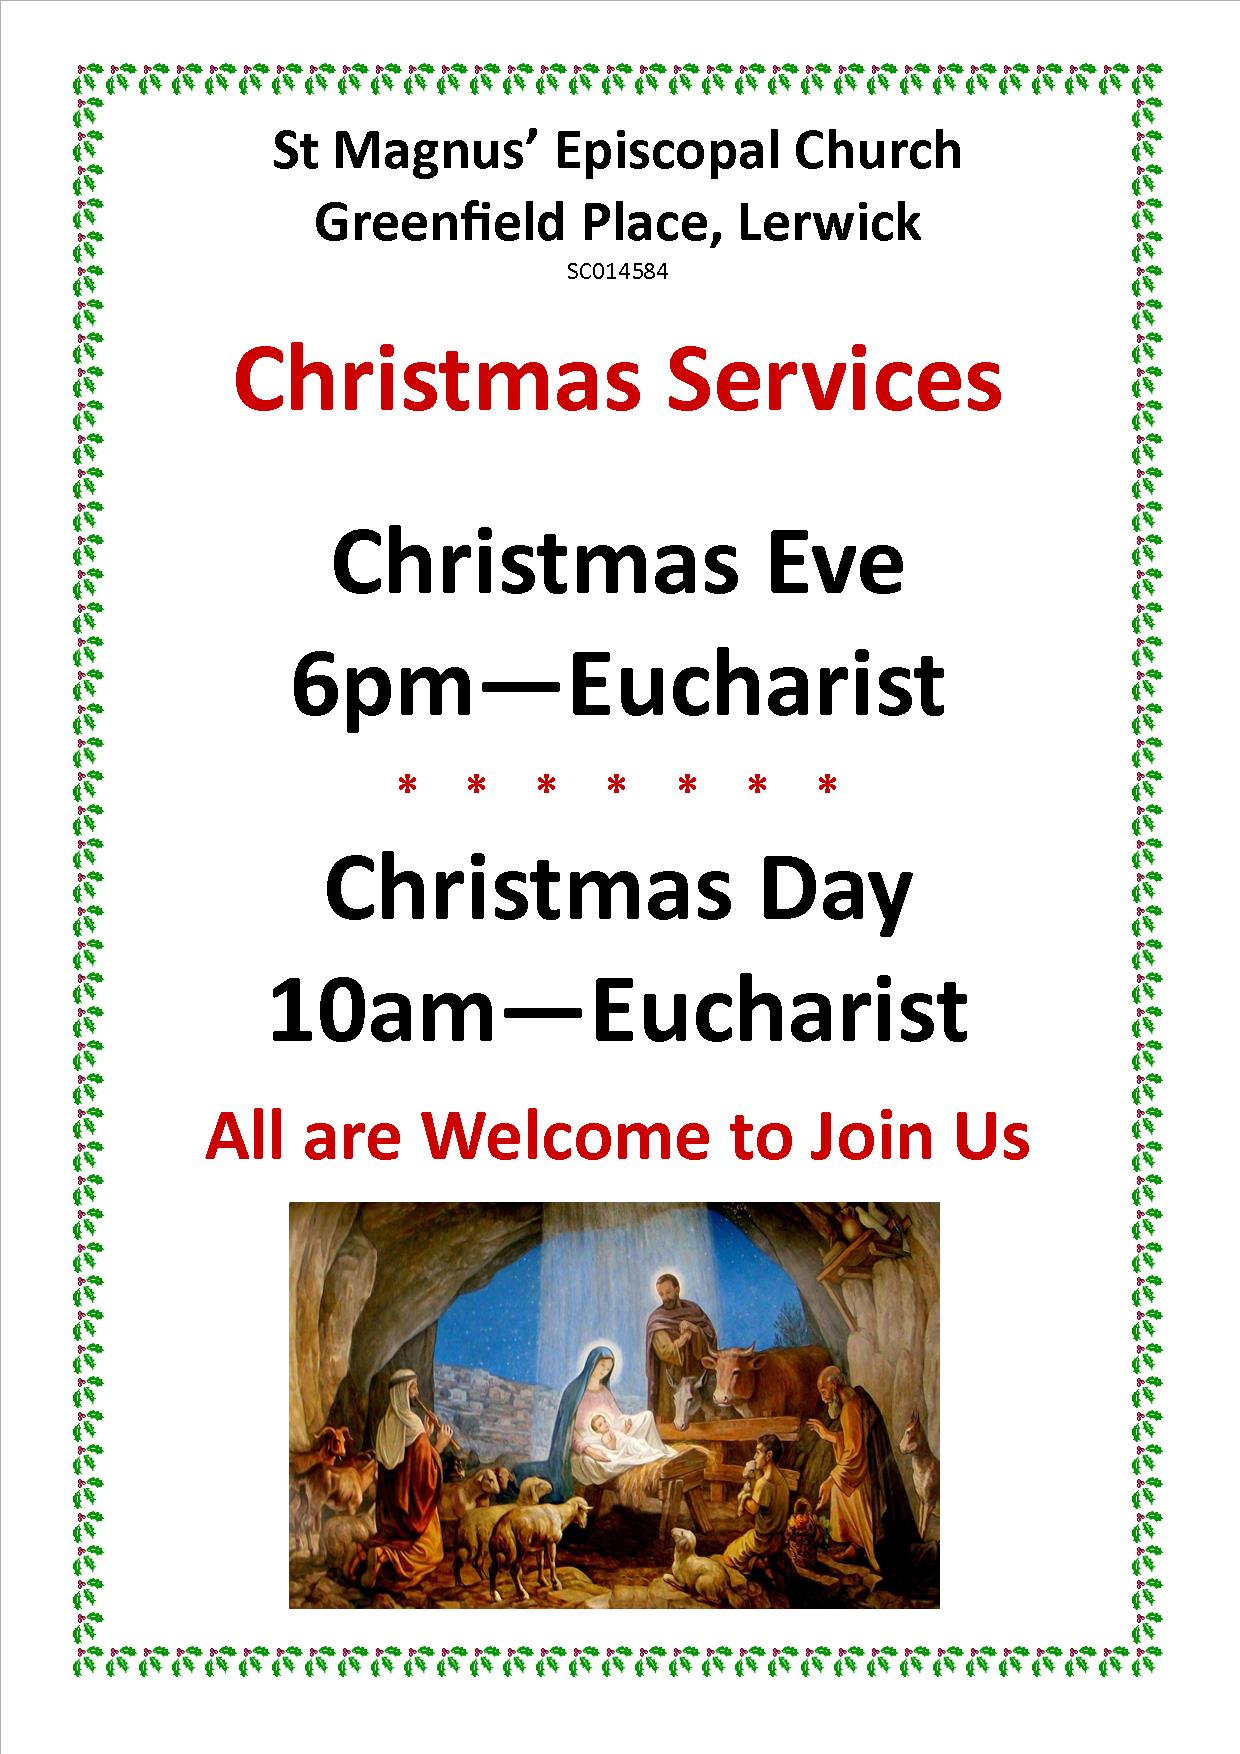 Christmas Services at St. Magnus’